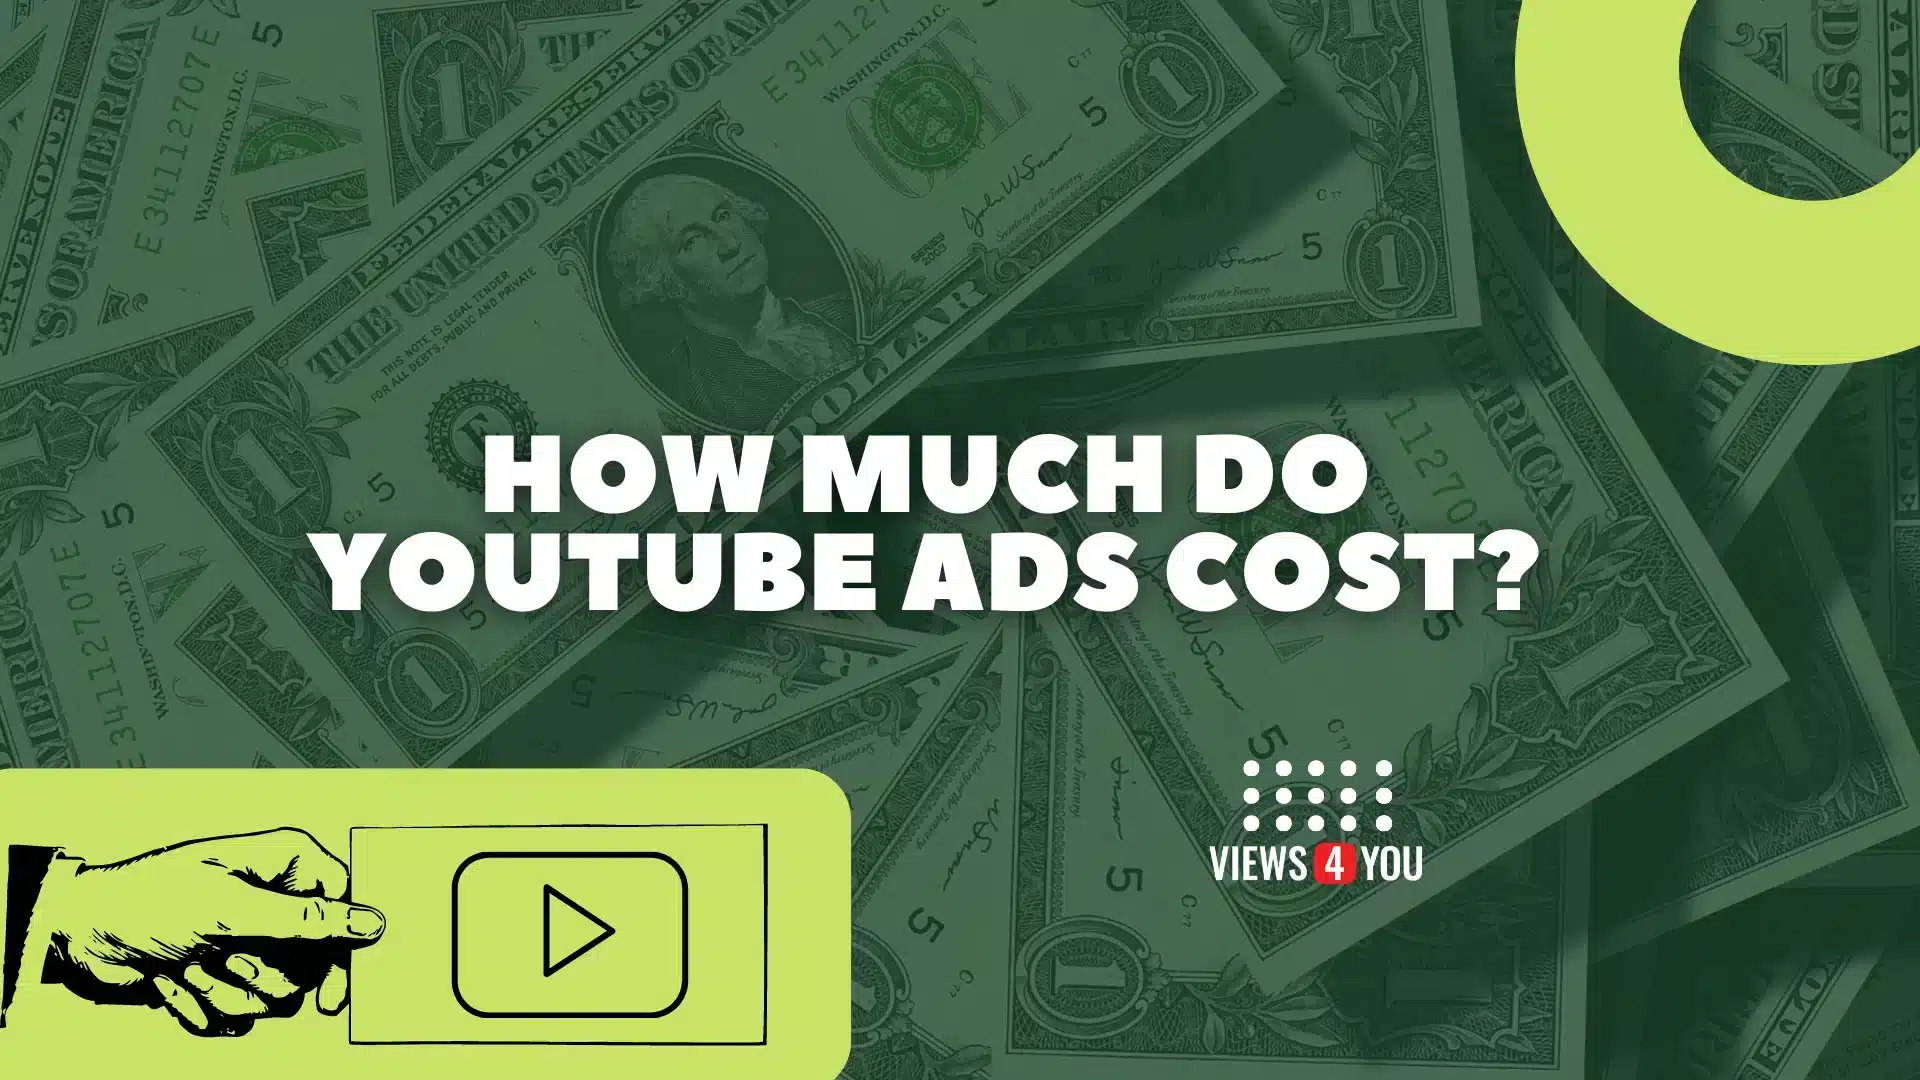 YouTube ads cost calculations